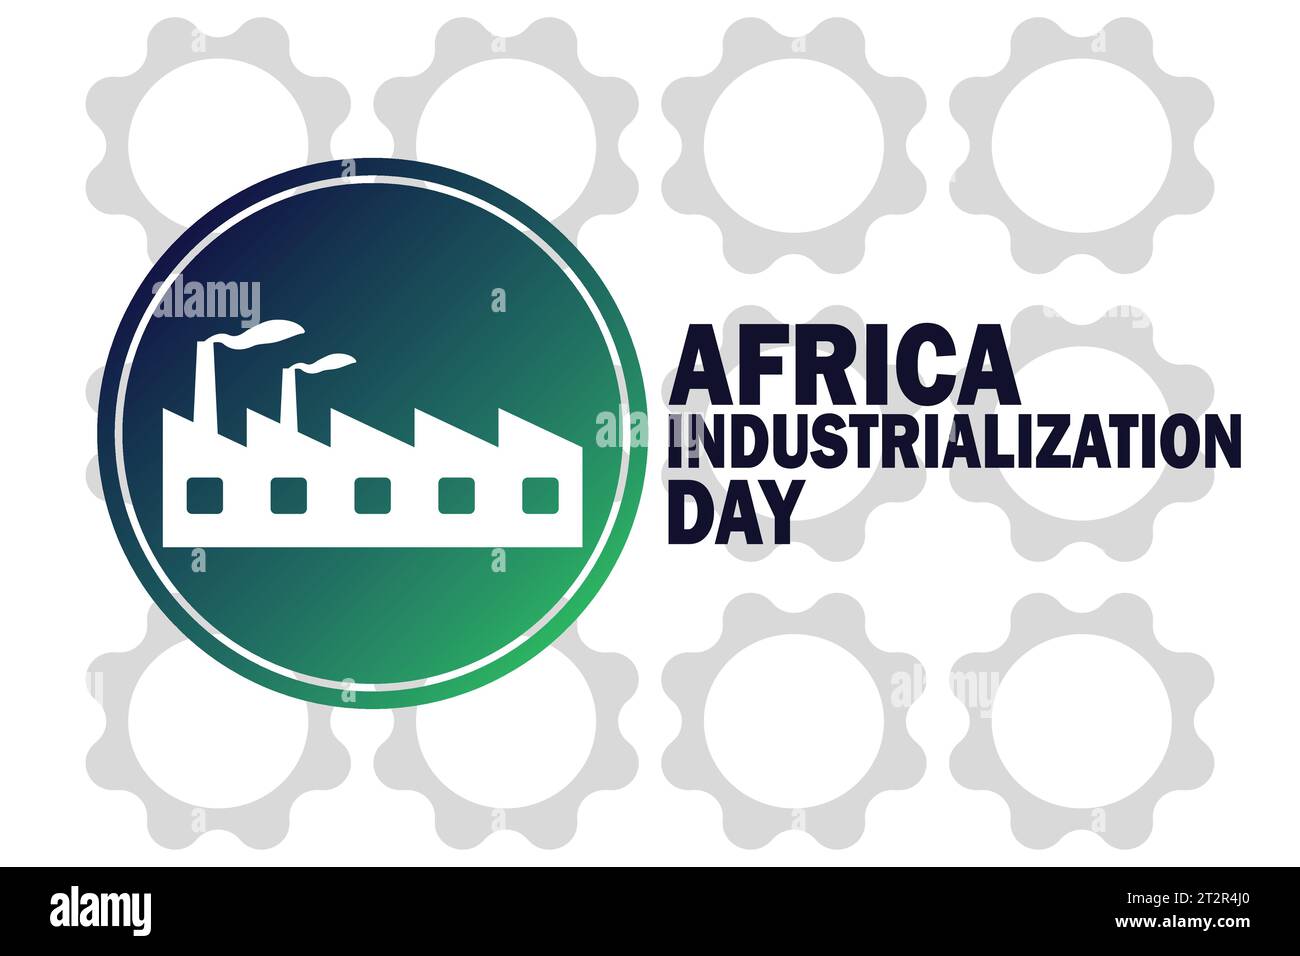 Africa Industrialization Day Vector illustration. Holiday concept. Template for background, banner, card, poster with text inscription. Stock Vector